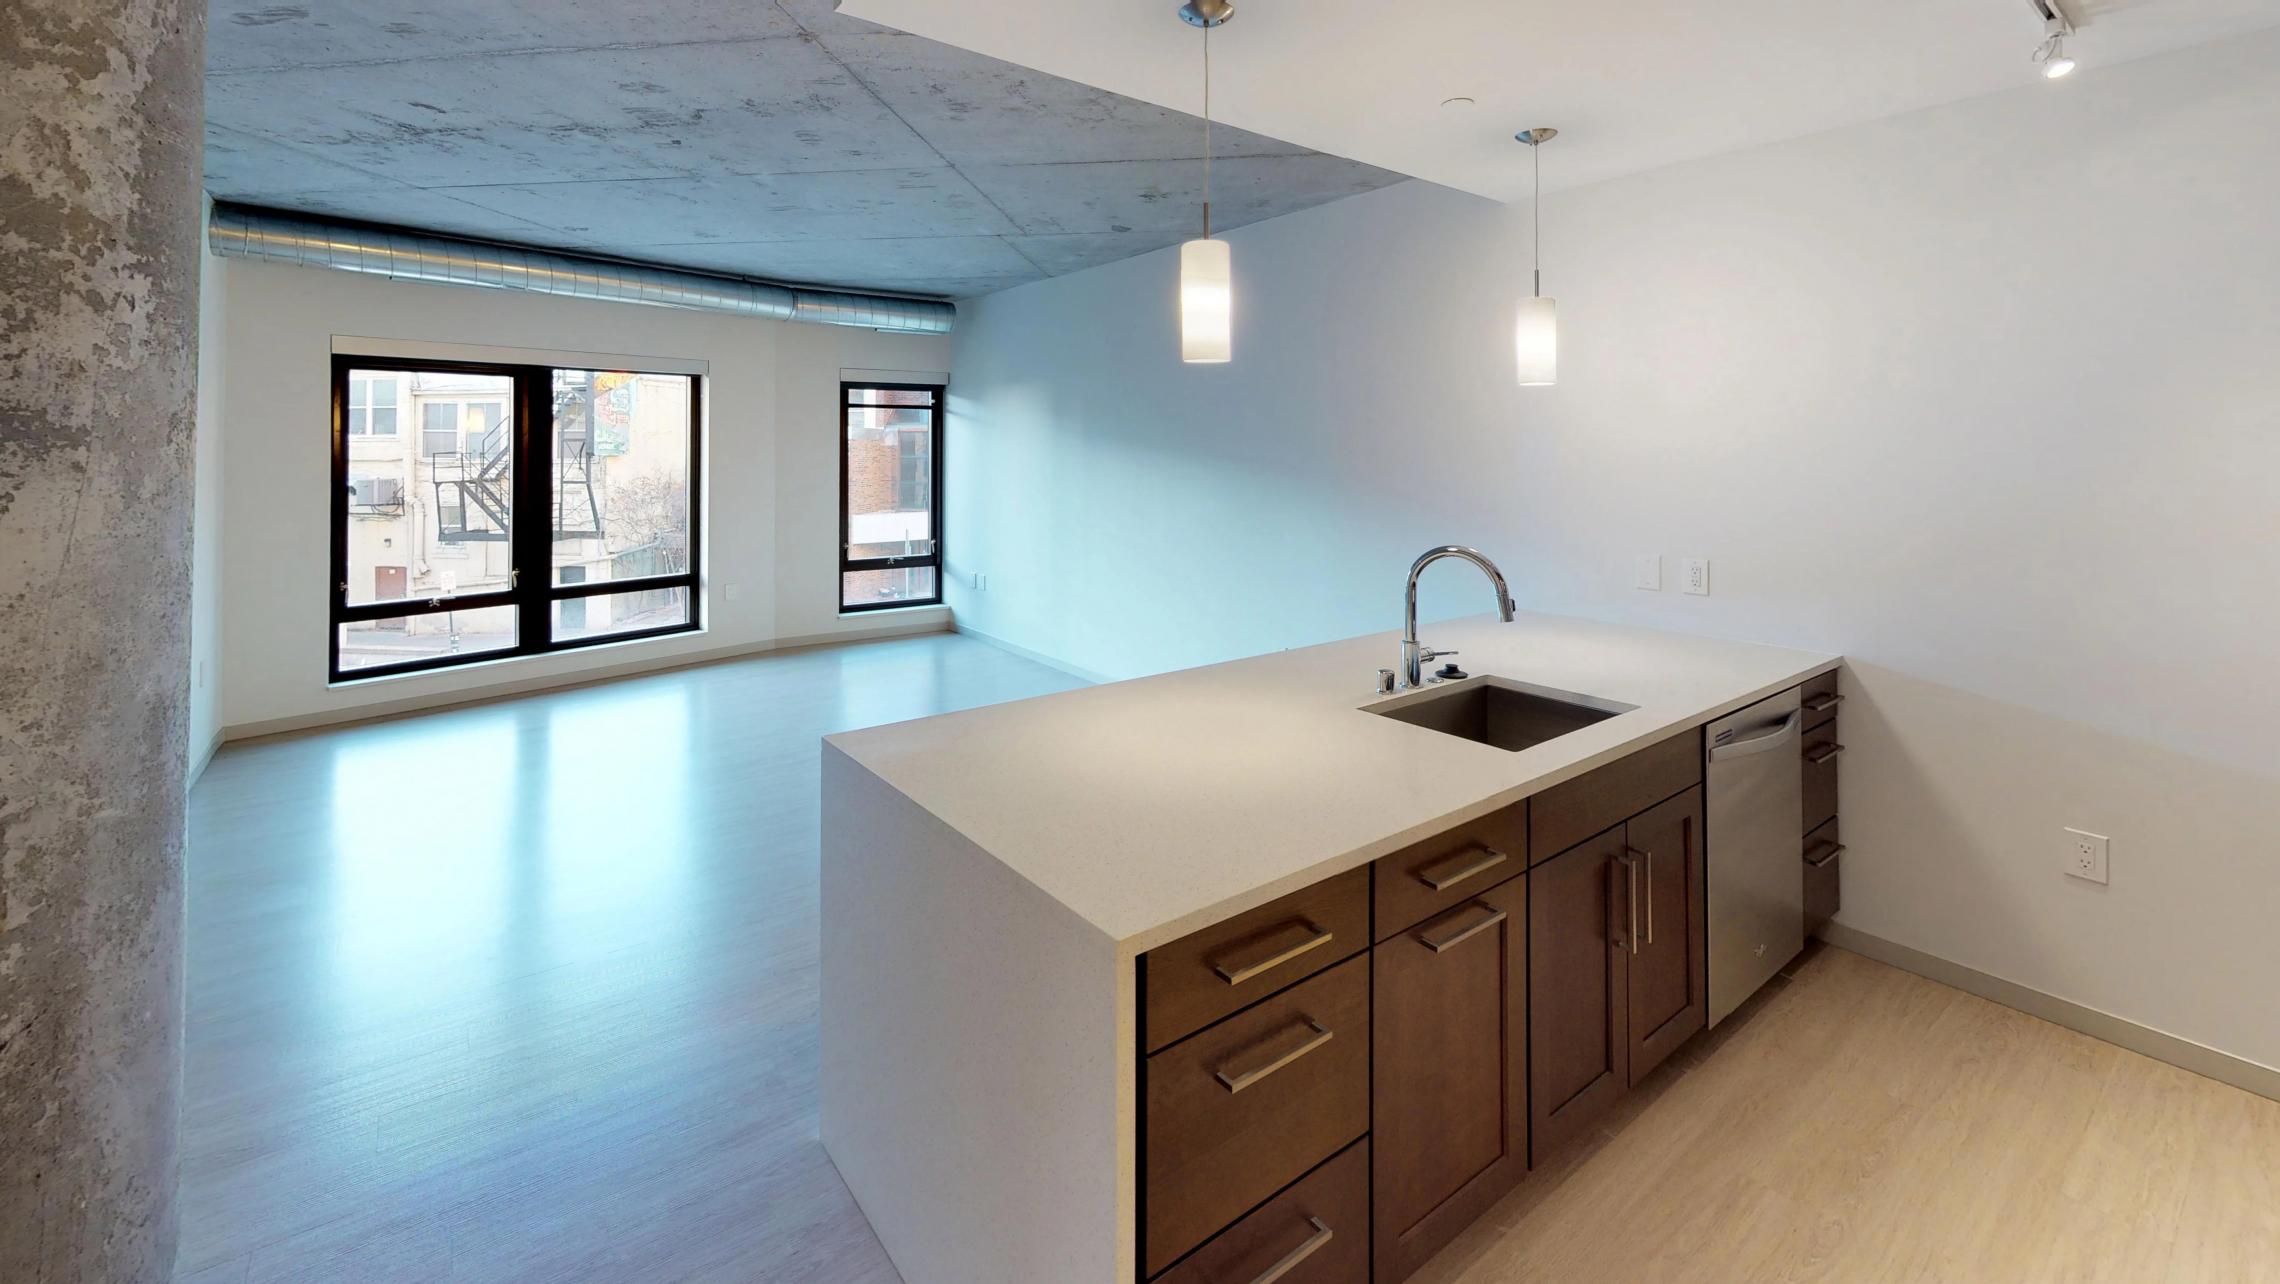 Pressman-Apartment-217-One-Bedroom-Luxury-Downtown-Upscale-Modern-Downtown-Madison-Capitol-Square